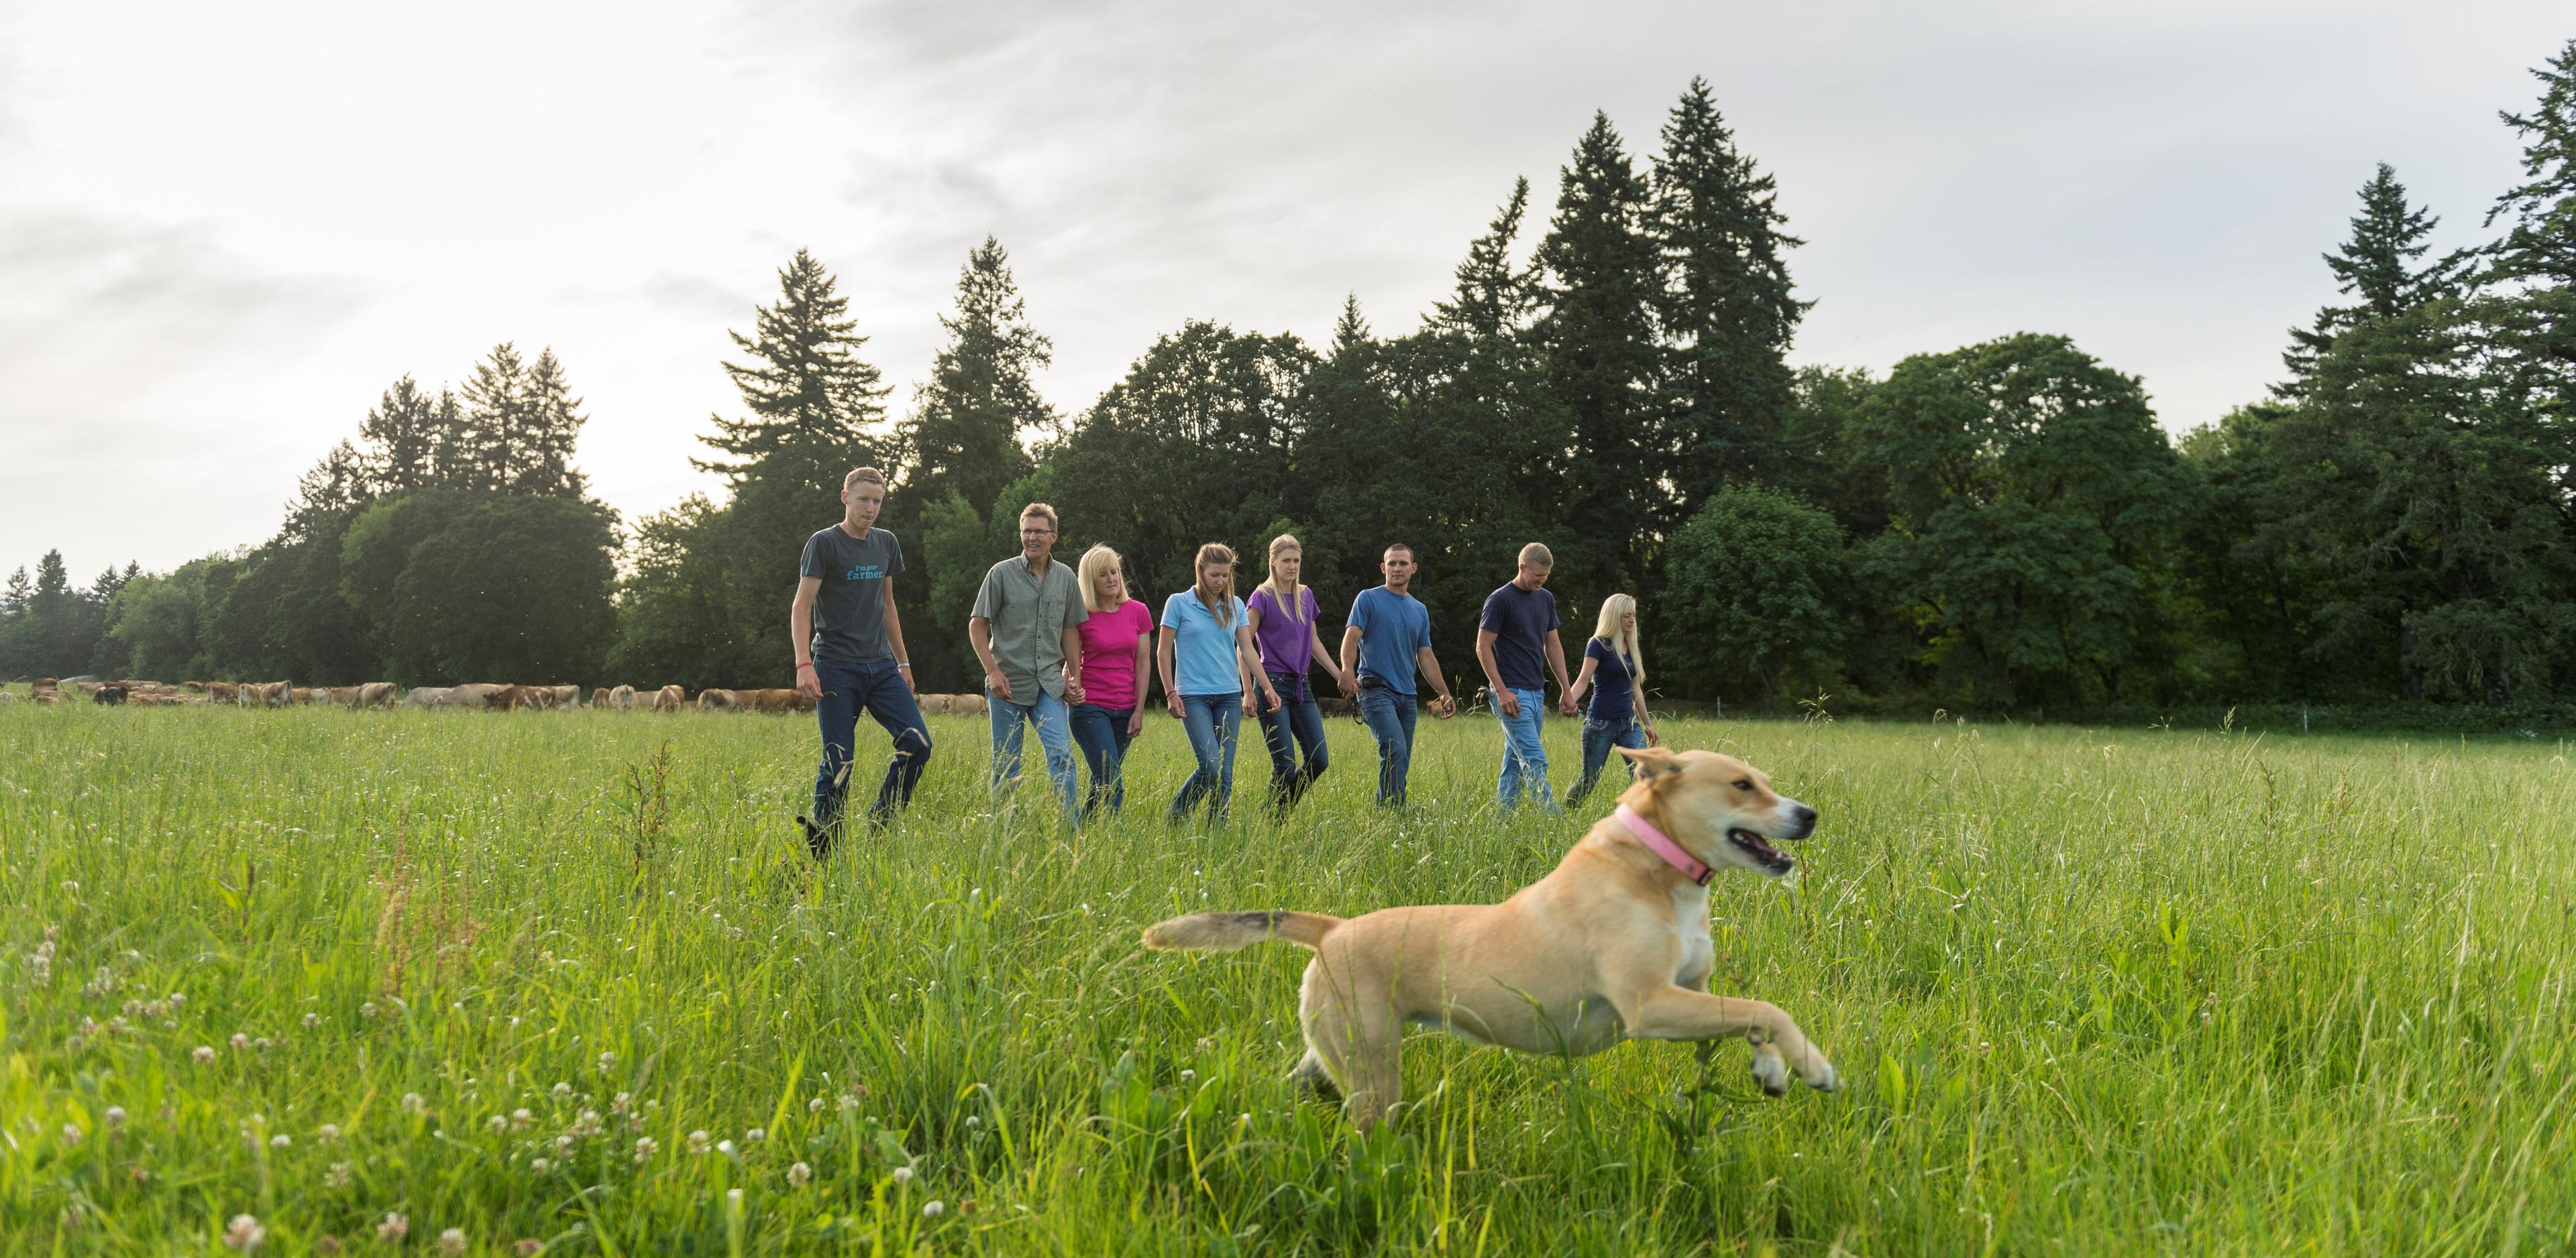 A dog leads the way as the Bansen family walks in the pasture.